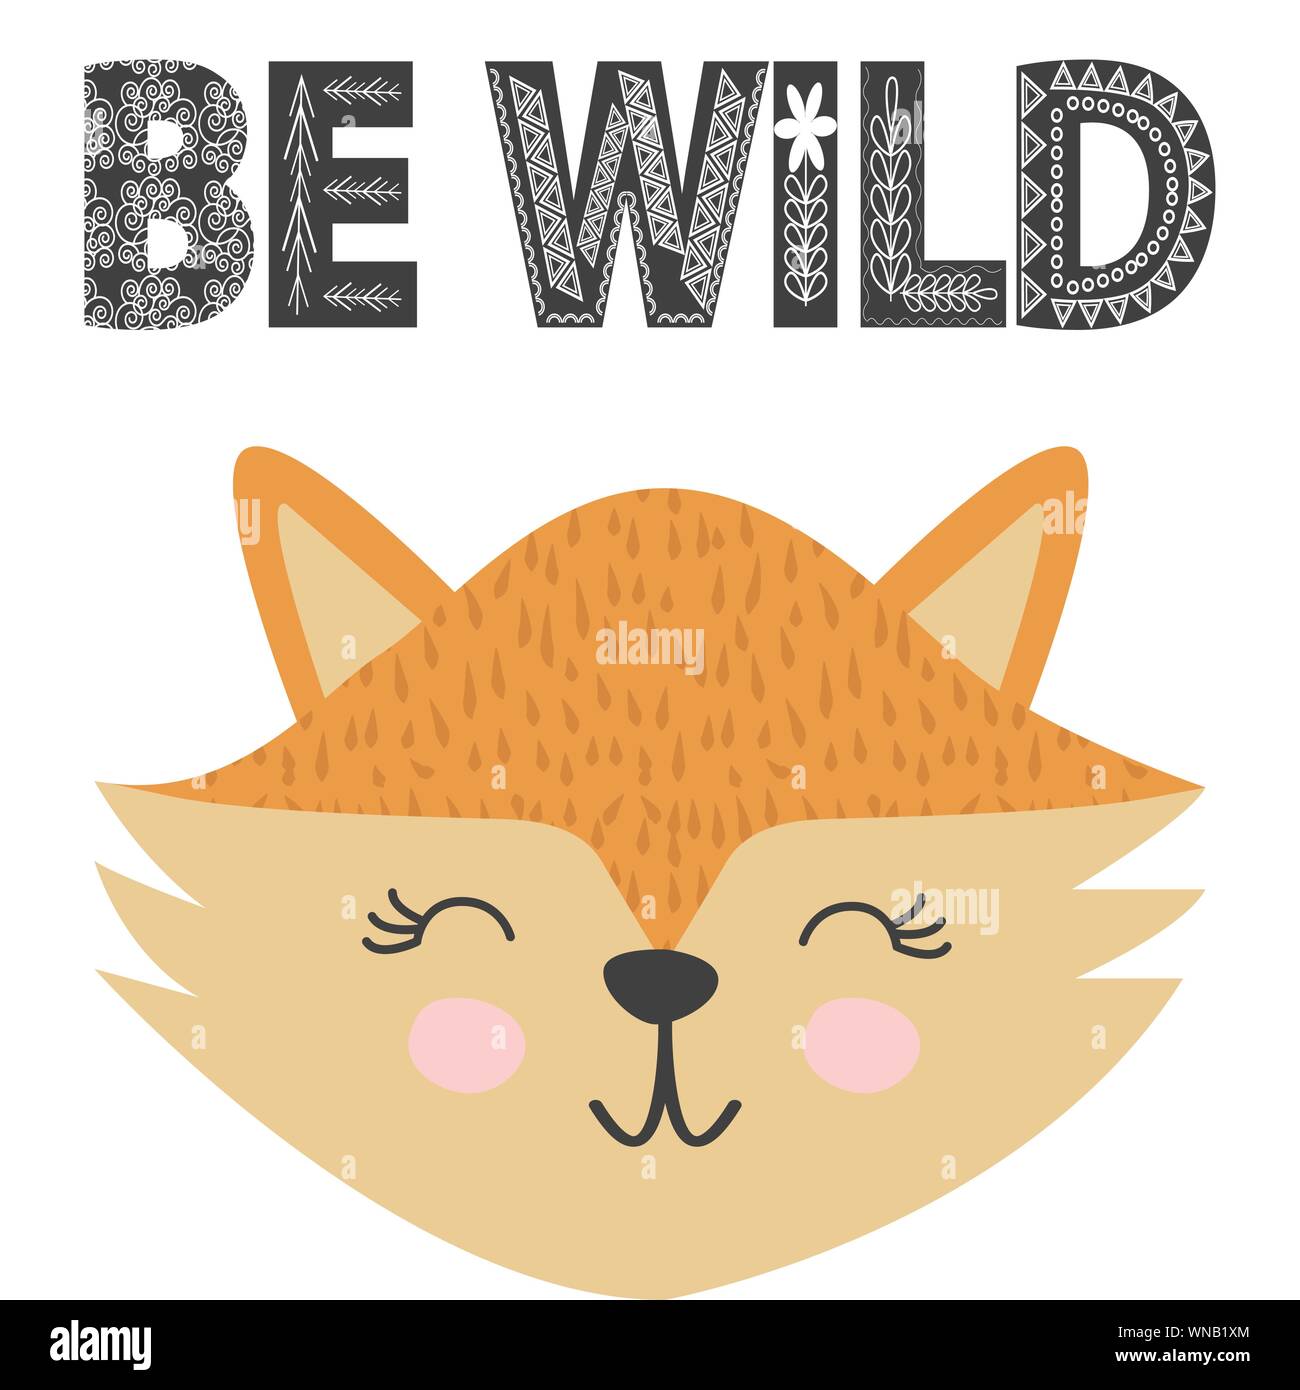 Cute little fox smiling face in scandinavian style. Inscription quote Be Wild in ethnic Norman style. Graphic design. Stock Vector